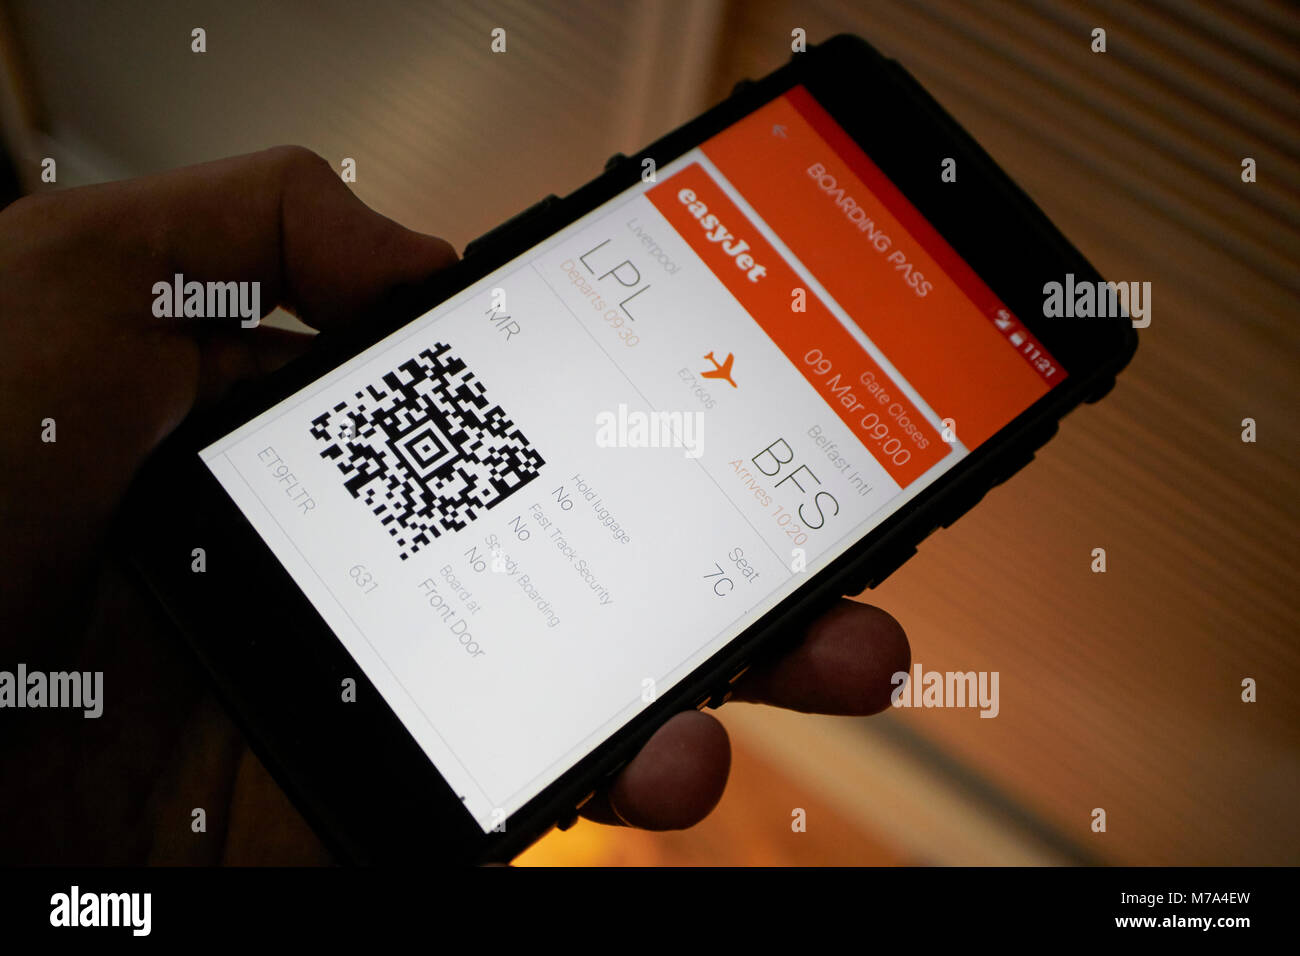 man holding electronic boarding pass using the easyjet app on a smartphone Stock Photo